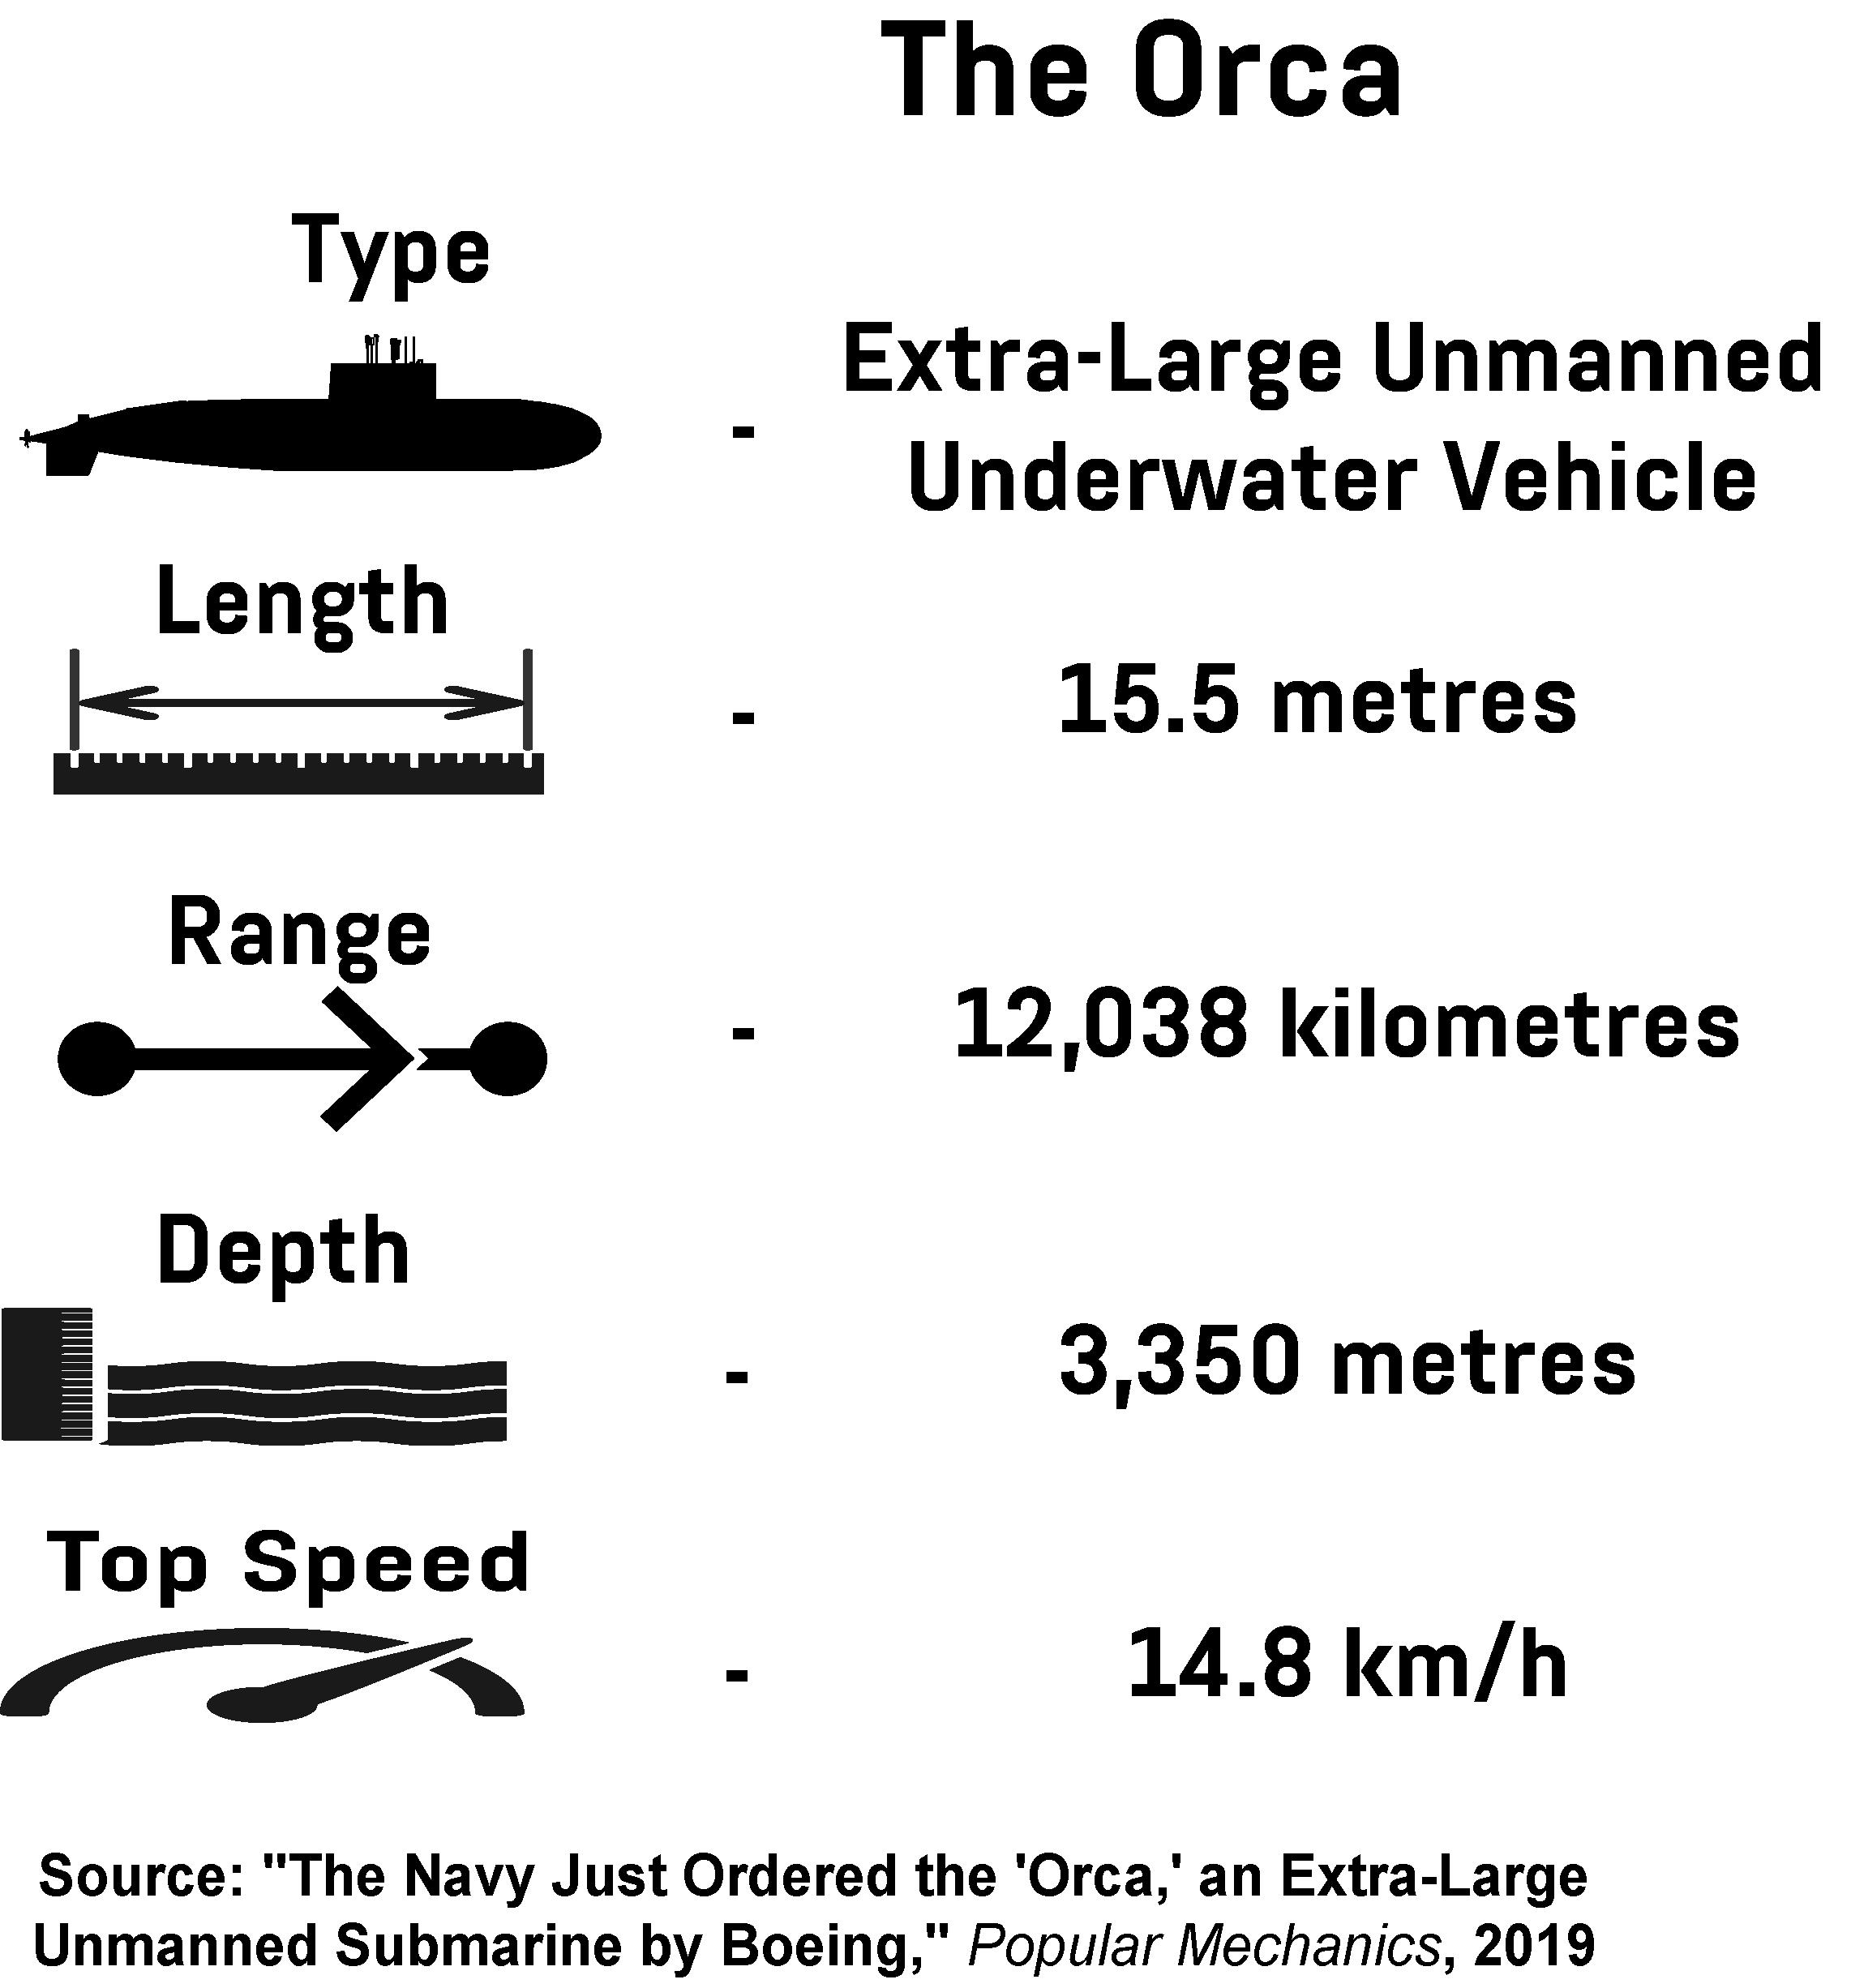 An infographic showing key facts about the Orca, an Extra-Large Unmanned Underwater Vehicle (XLUUV).